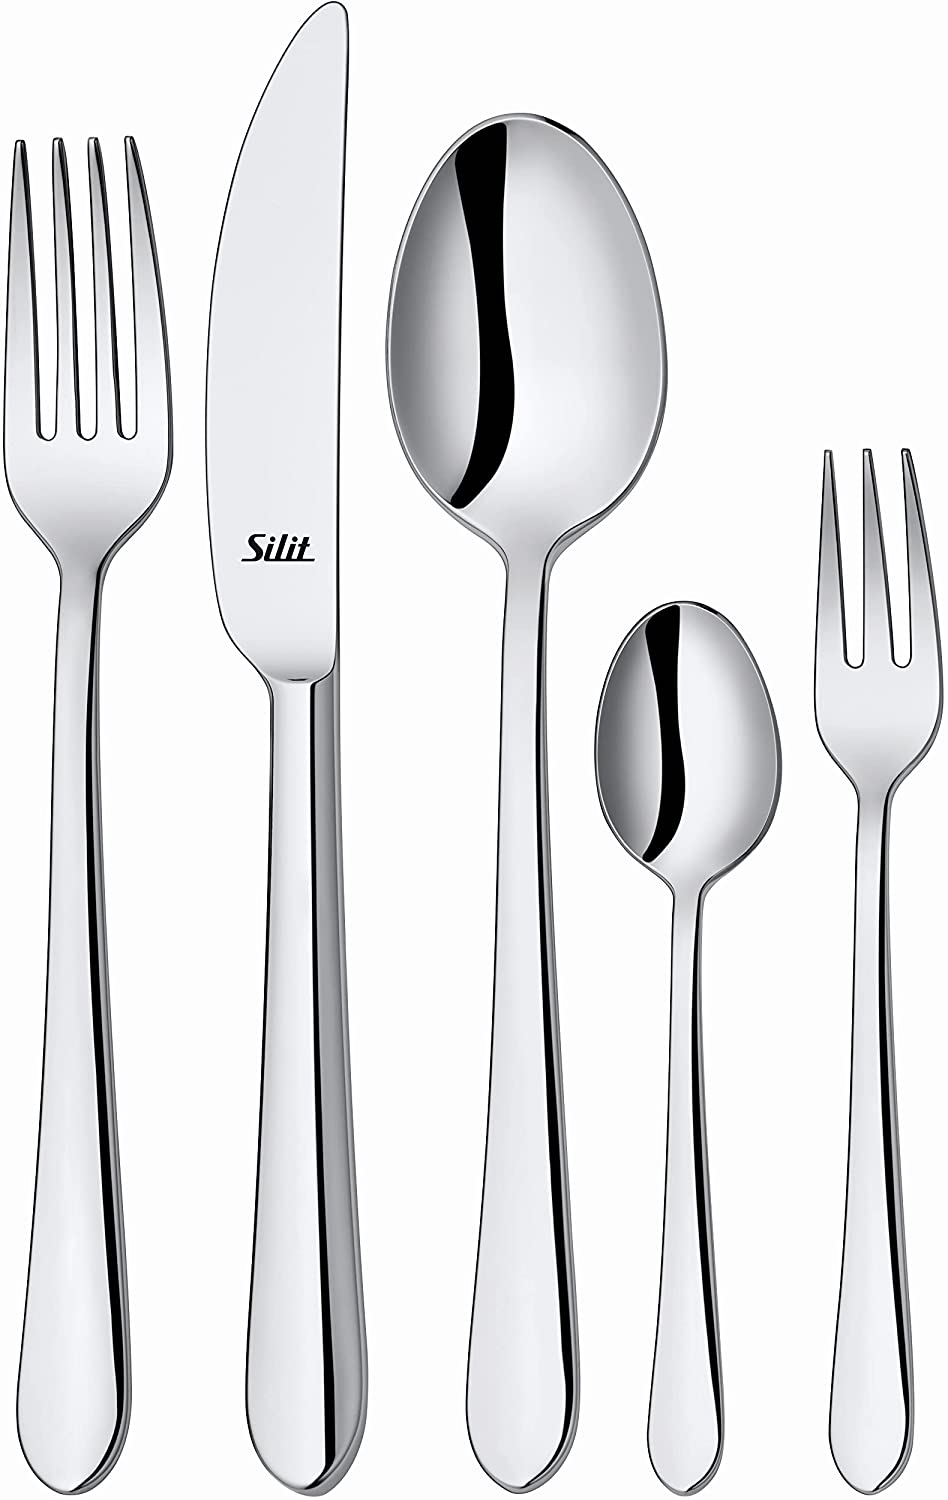 Silit Midi Cutlery Set for 6 People, 30 Pieces, Monobloc Knife, Crominox Polished Stainless Steel, Shiny, Dishwasher Safe